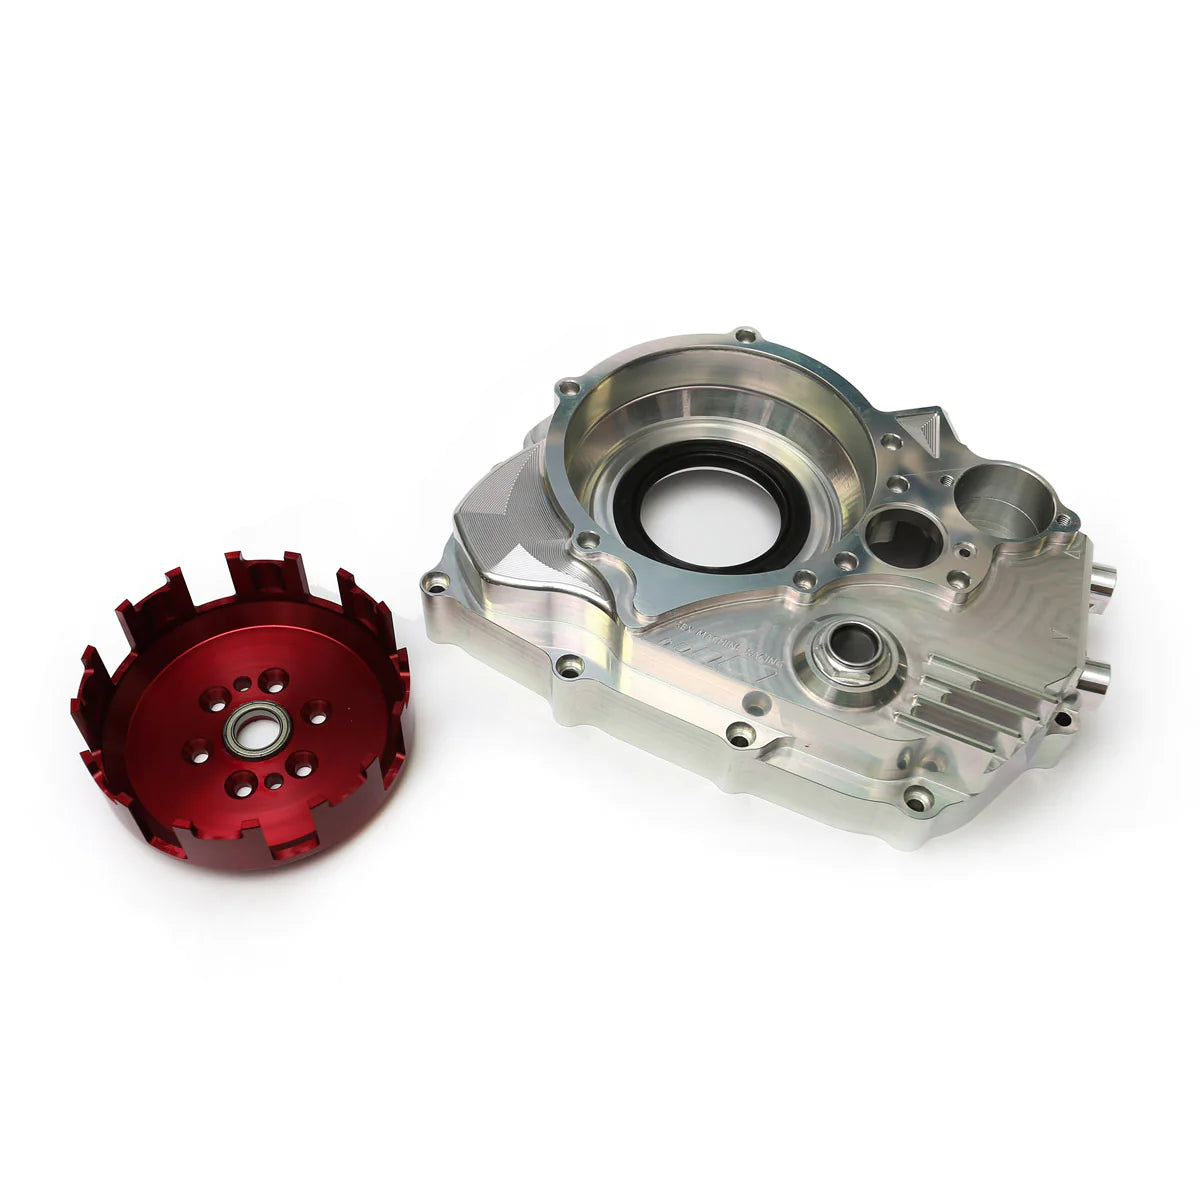 Sex Machine Racing CNC 6 Plate Dry Clutch Kit - Cable Version